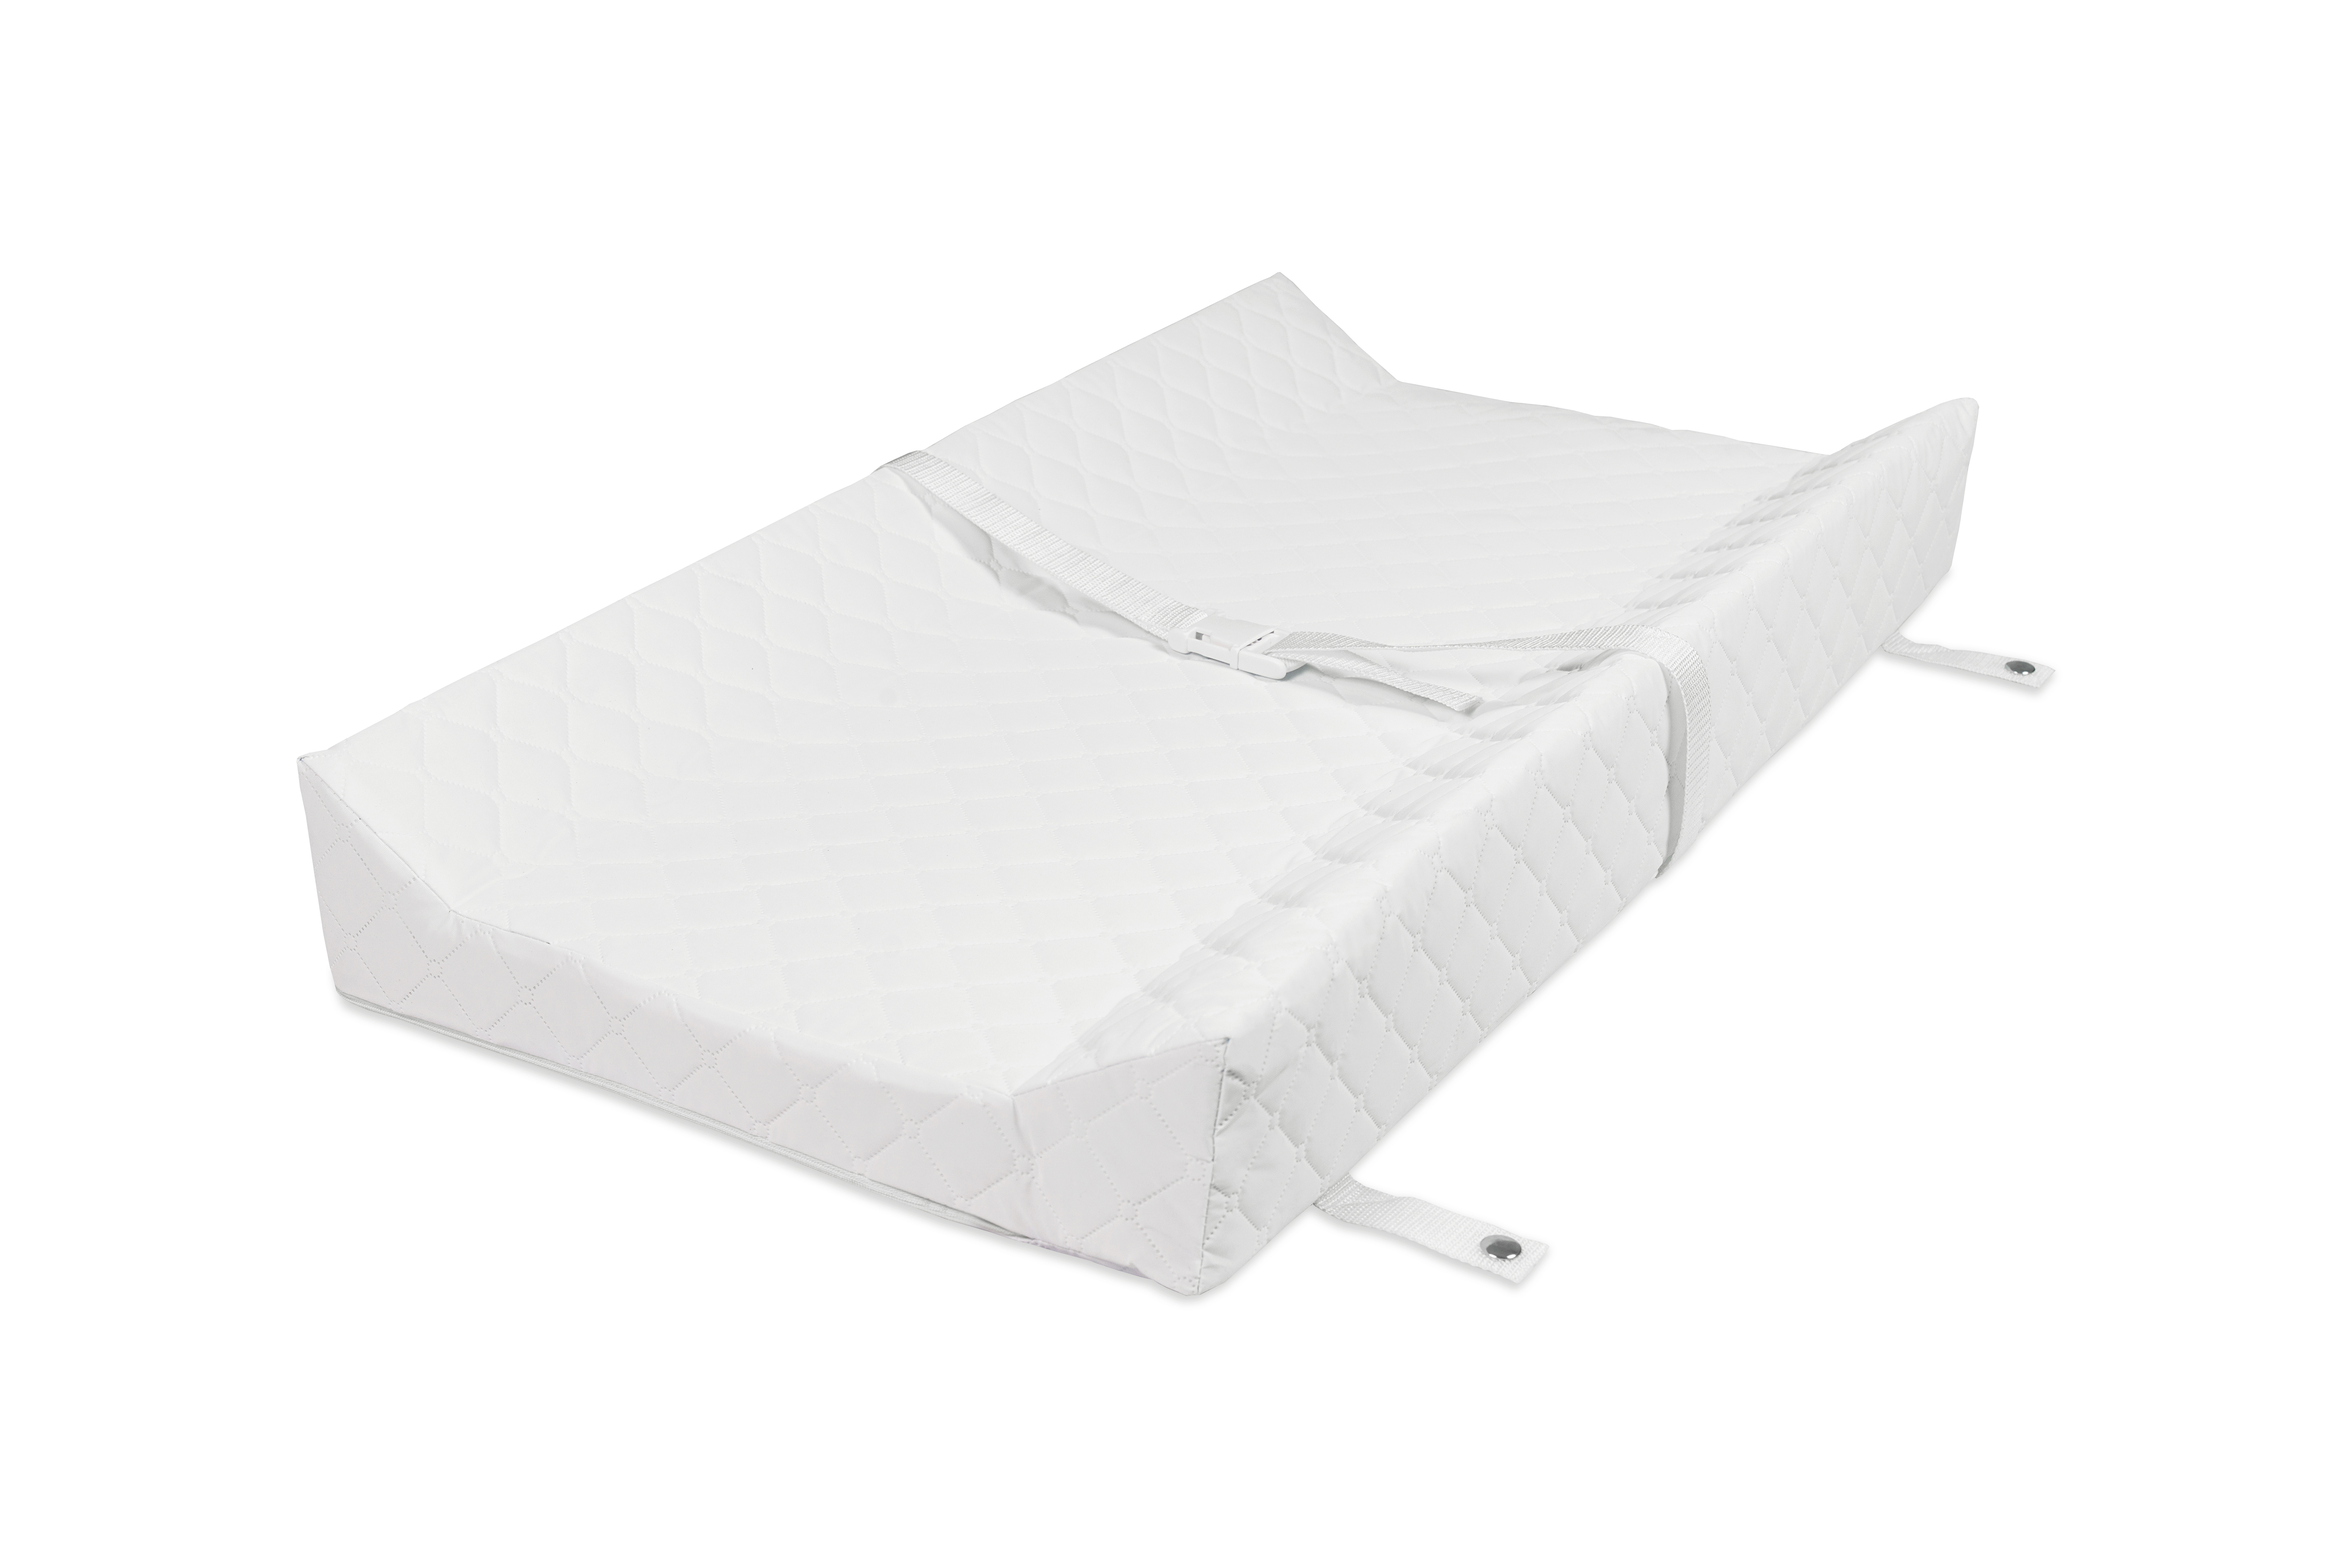 DaVinci 31" Contour Changing Pad for Changer Tray - image 1 of 5